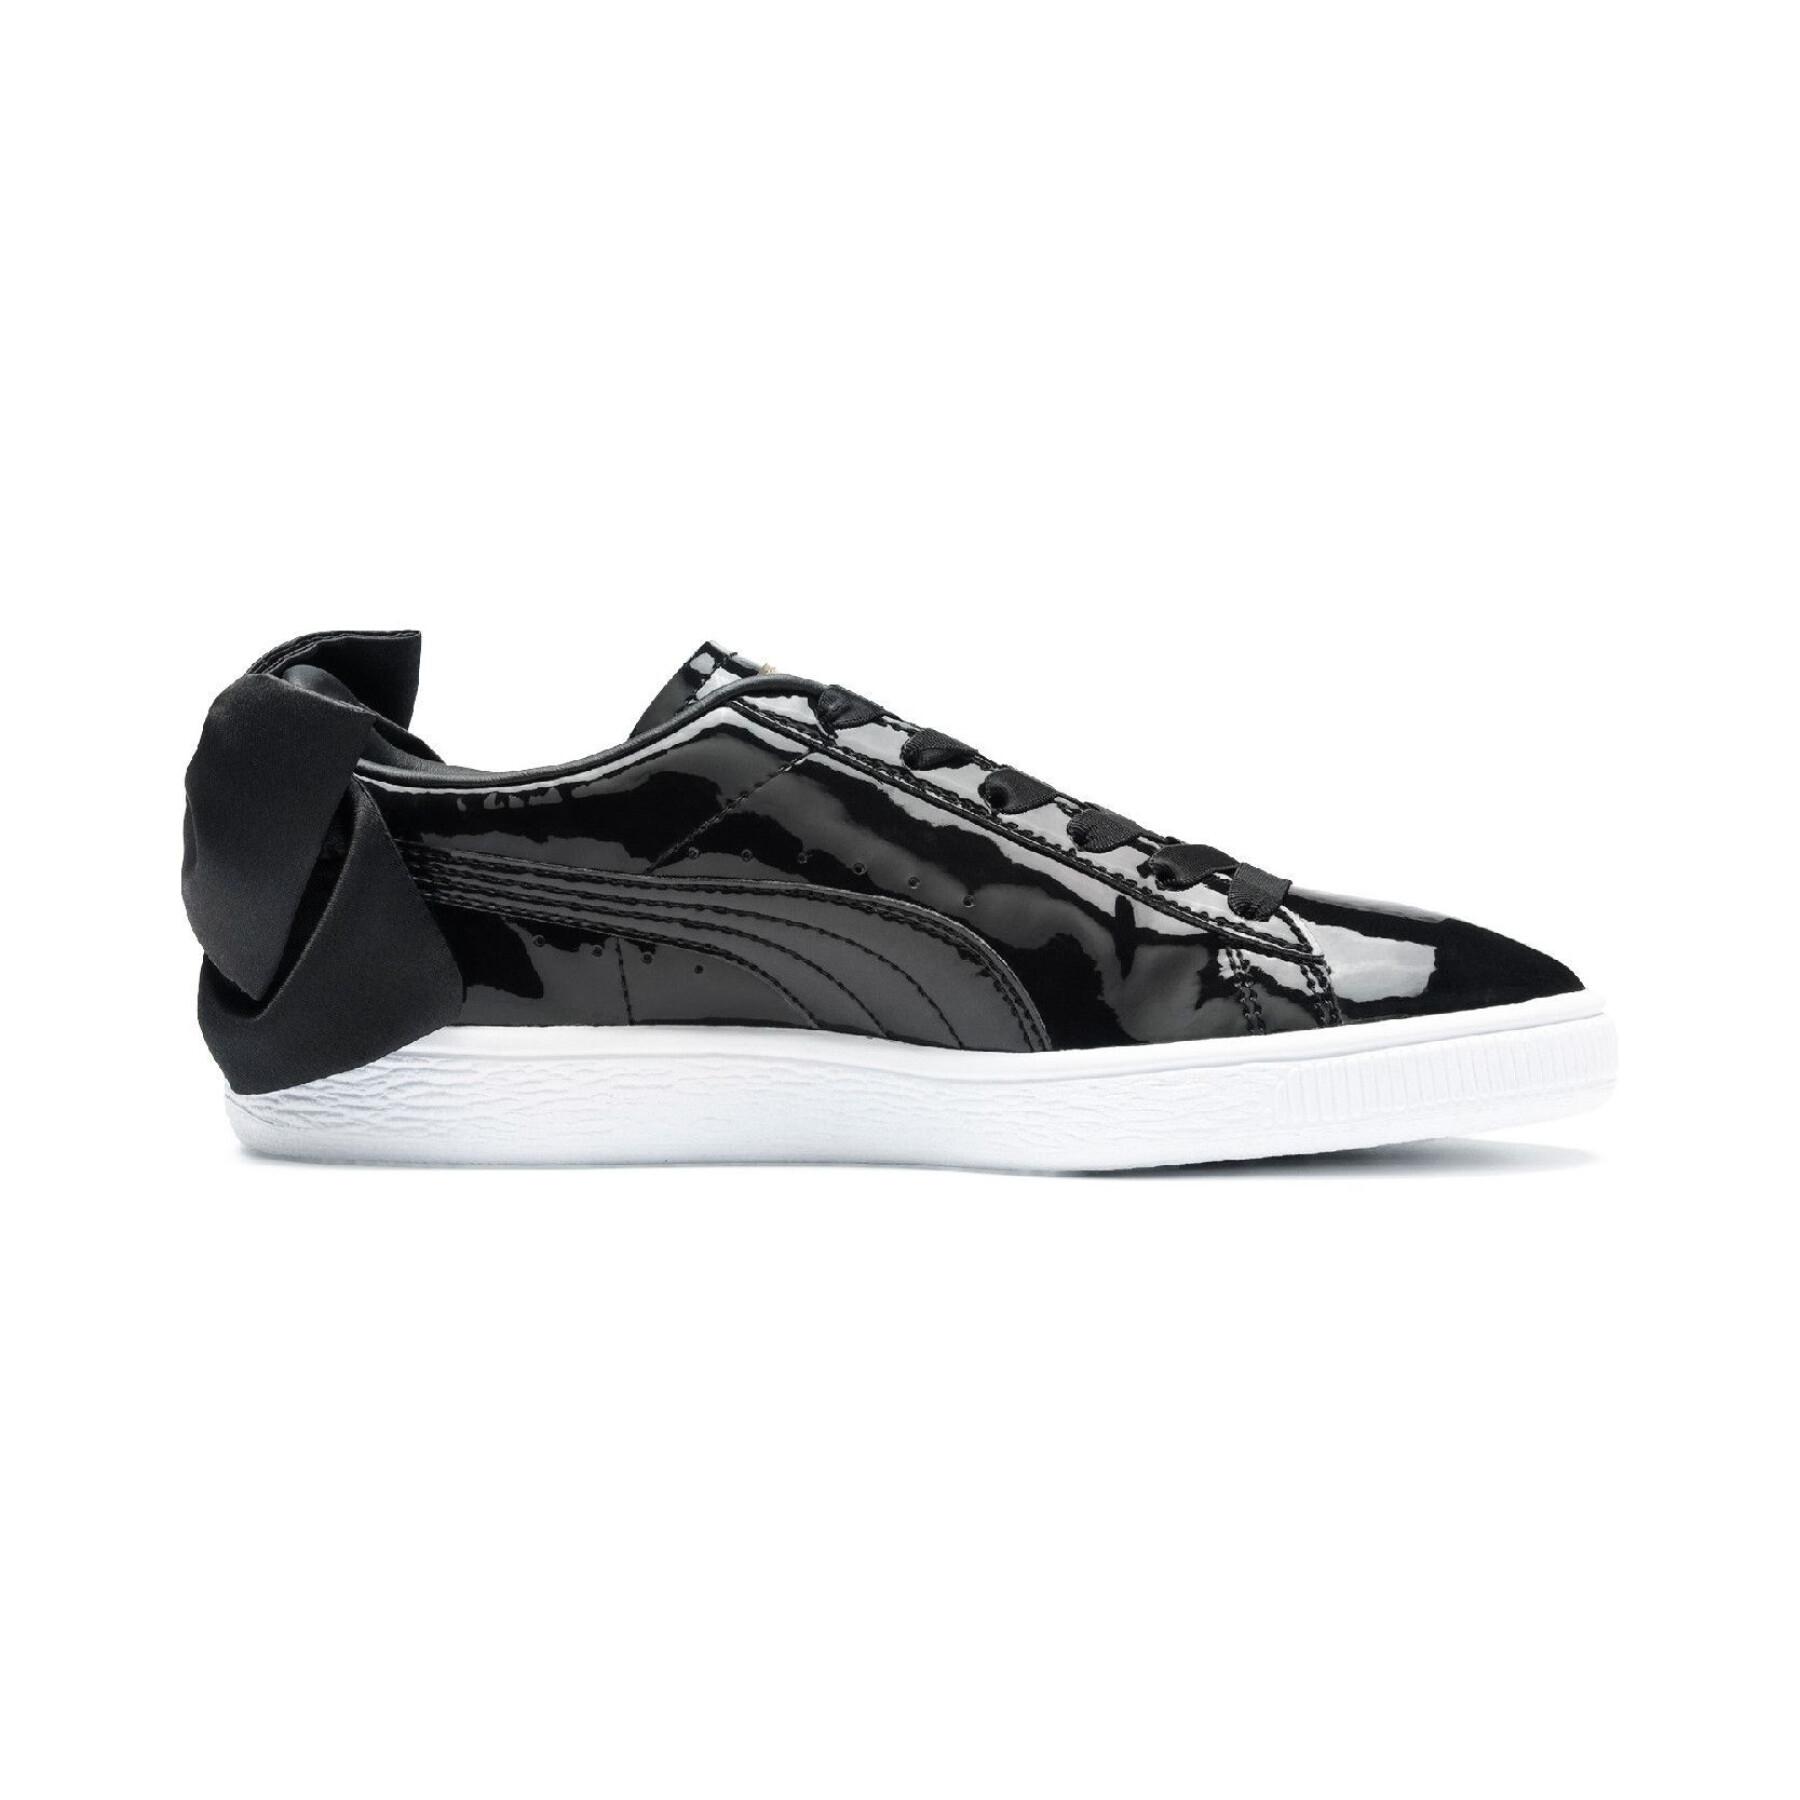 Women's sneakers Puma Suede Bow Patent